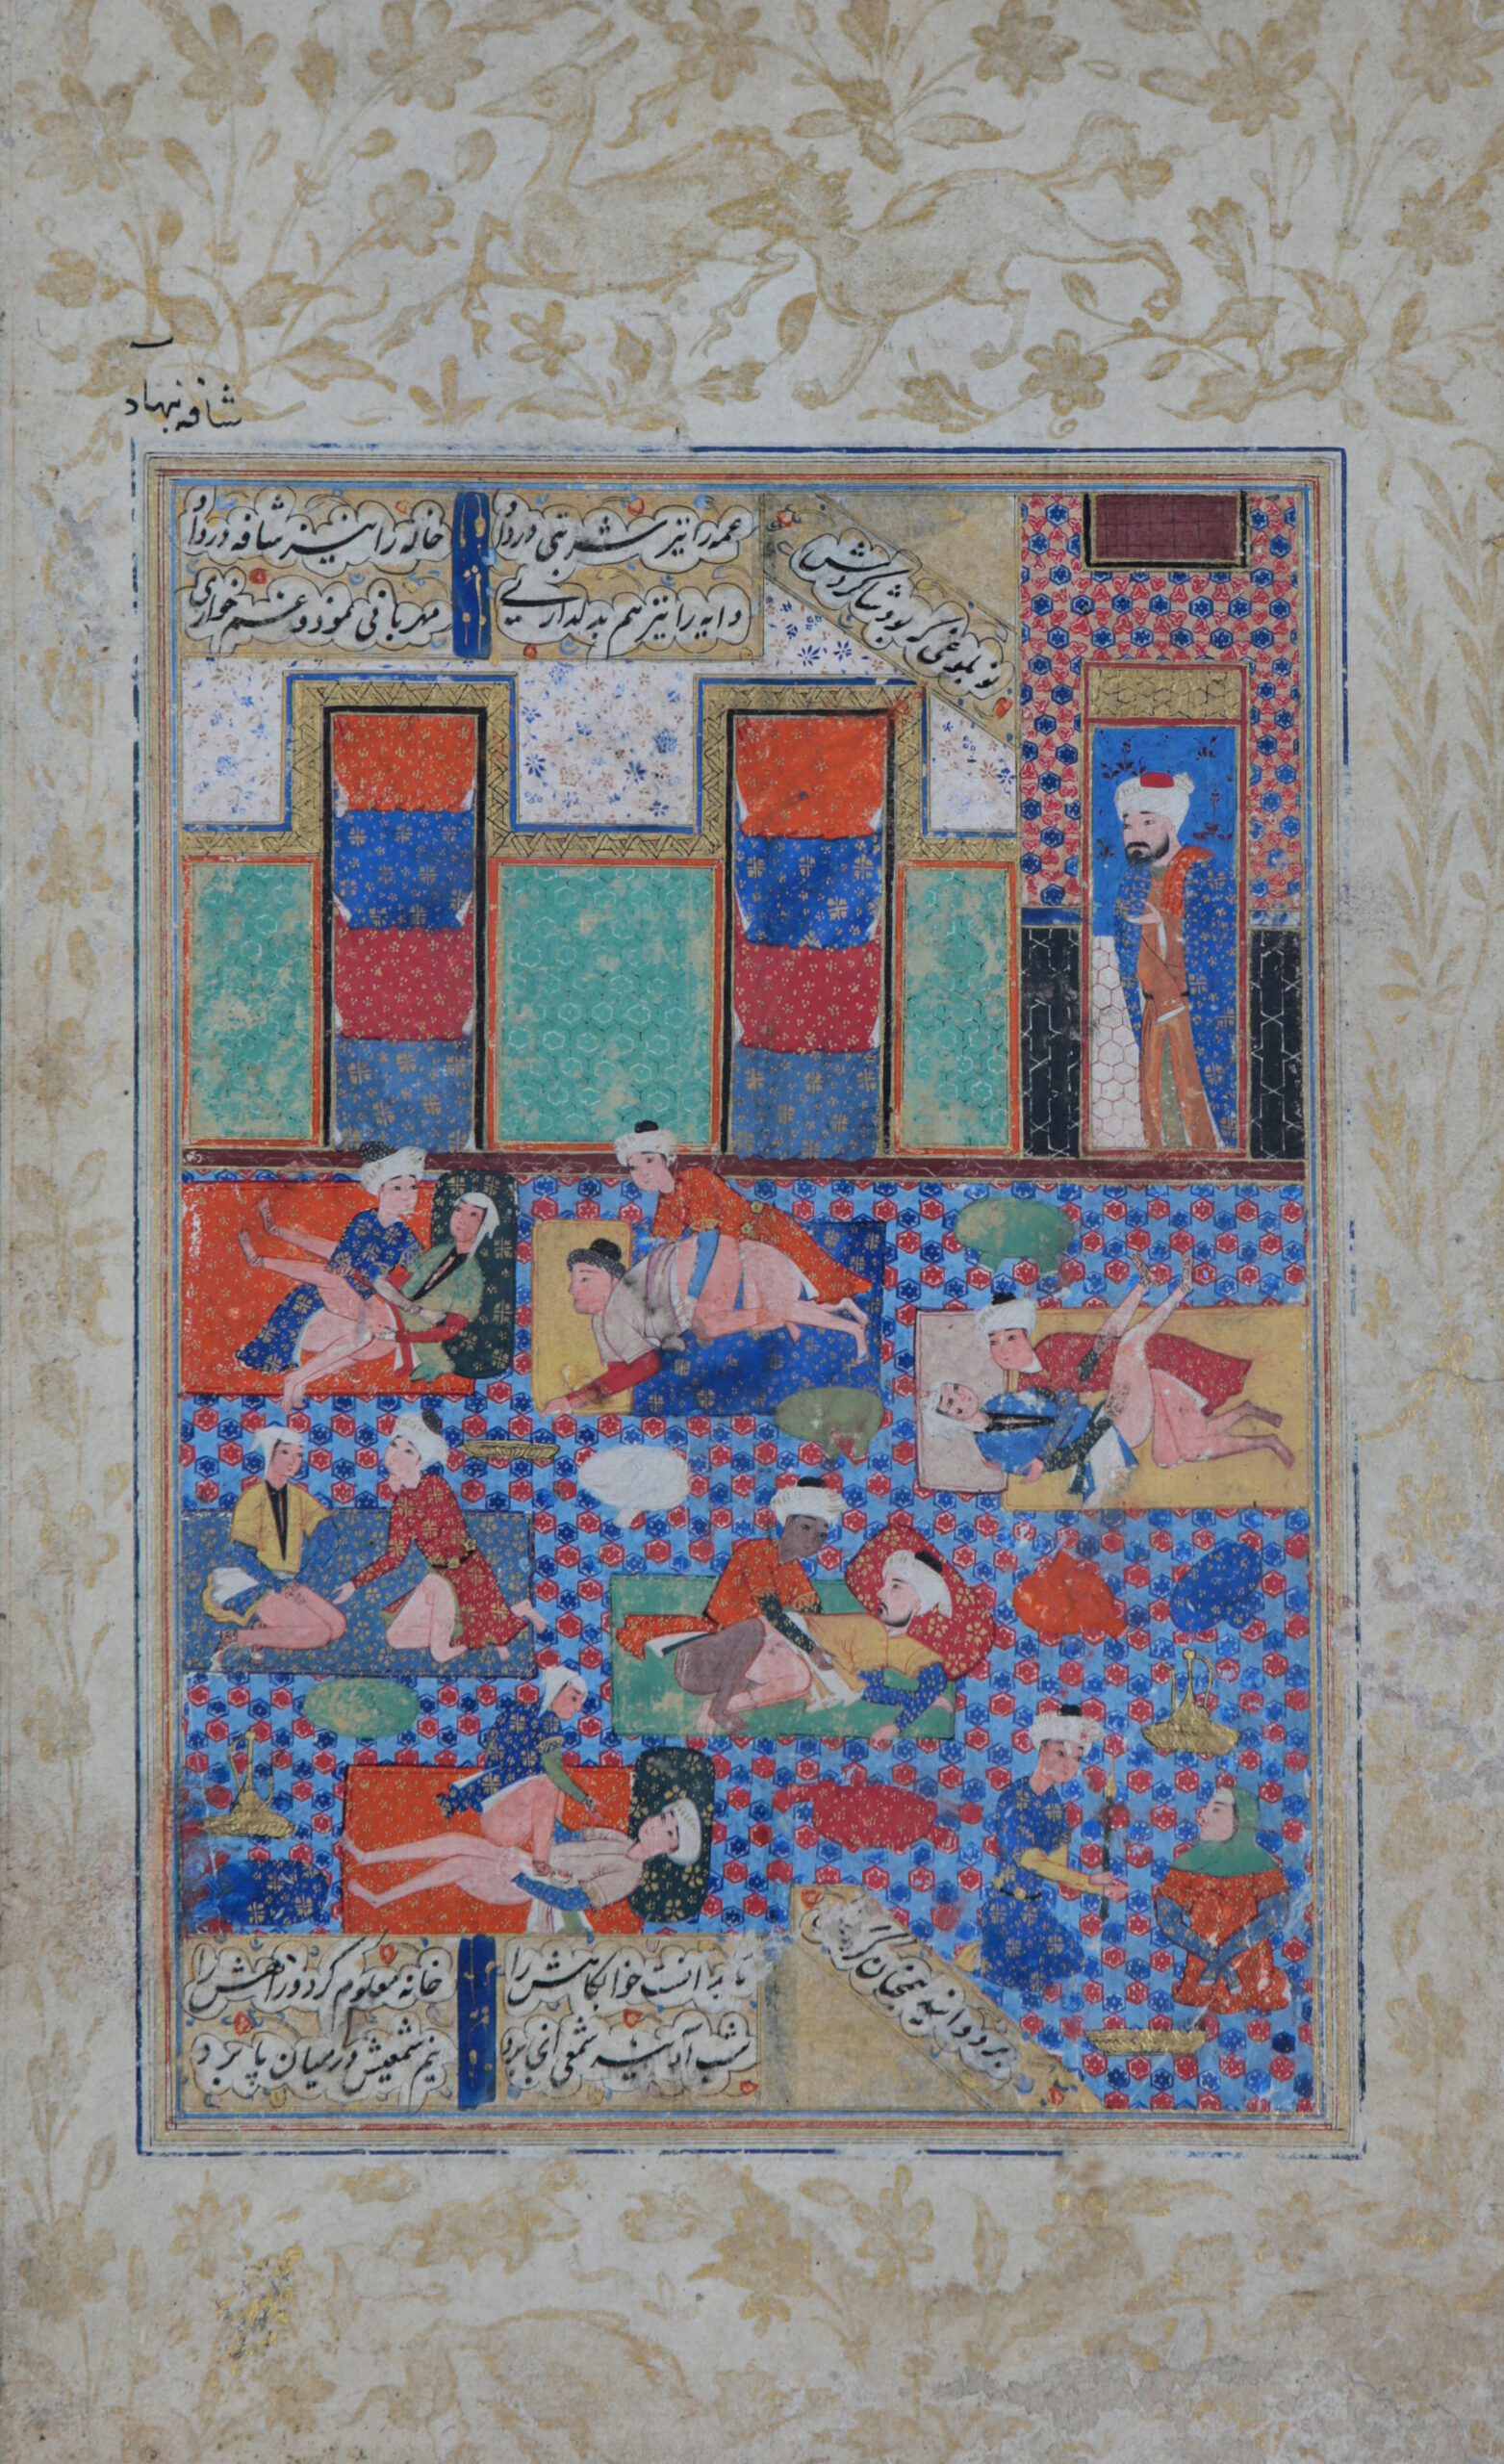 A very rare early illustration to a mid13-th century obscene poem, Bukhara, Iran, Late 16th century